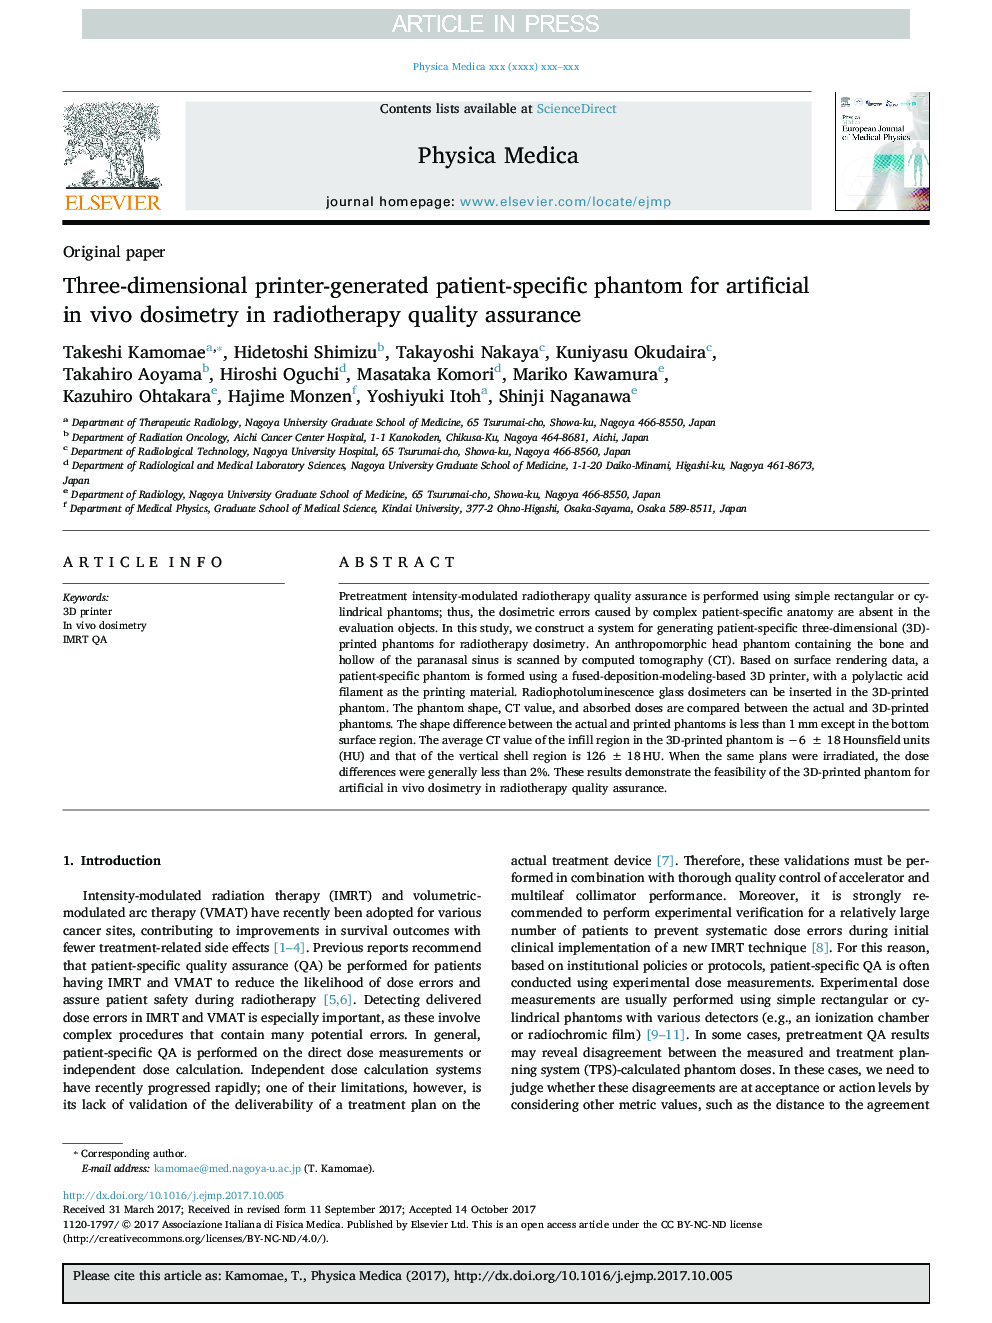 Three-dimensional printer-generated patient-specific phantom for artificial in vivo dosimetry in radiotherapy quality assurance